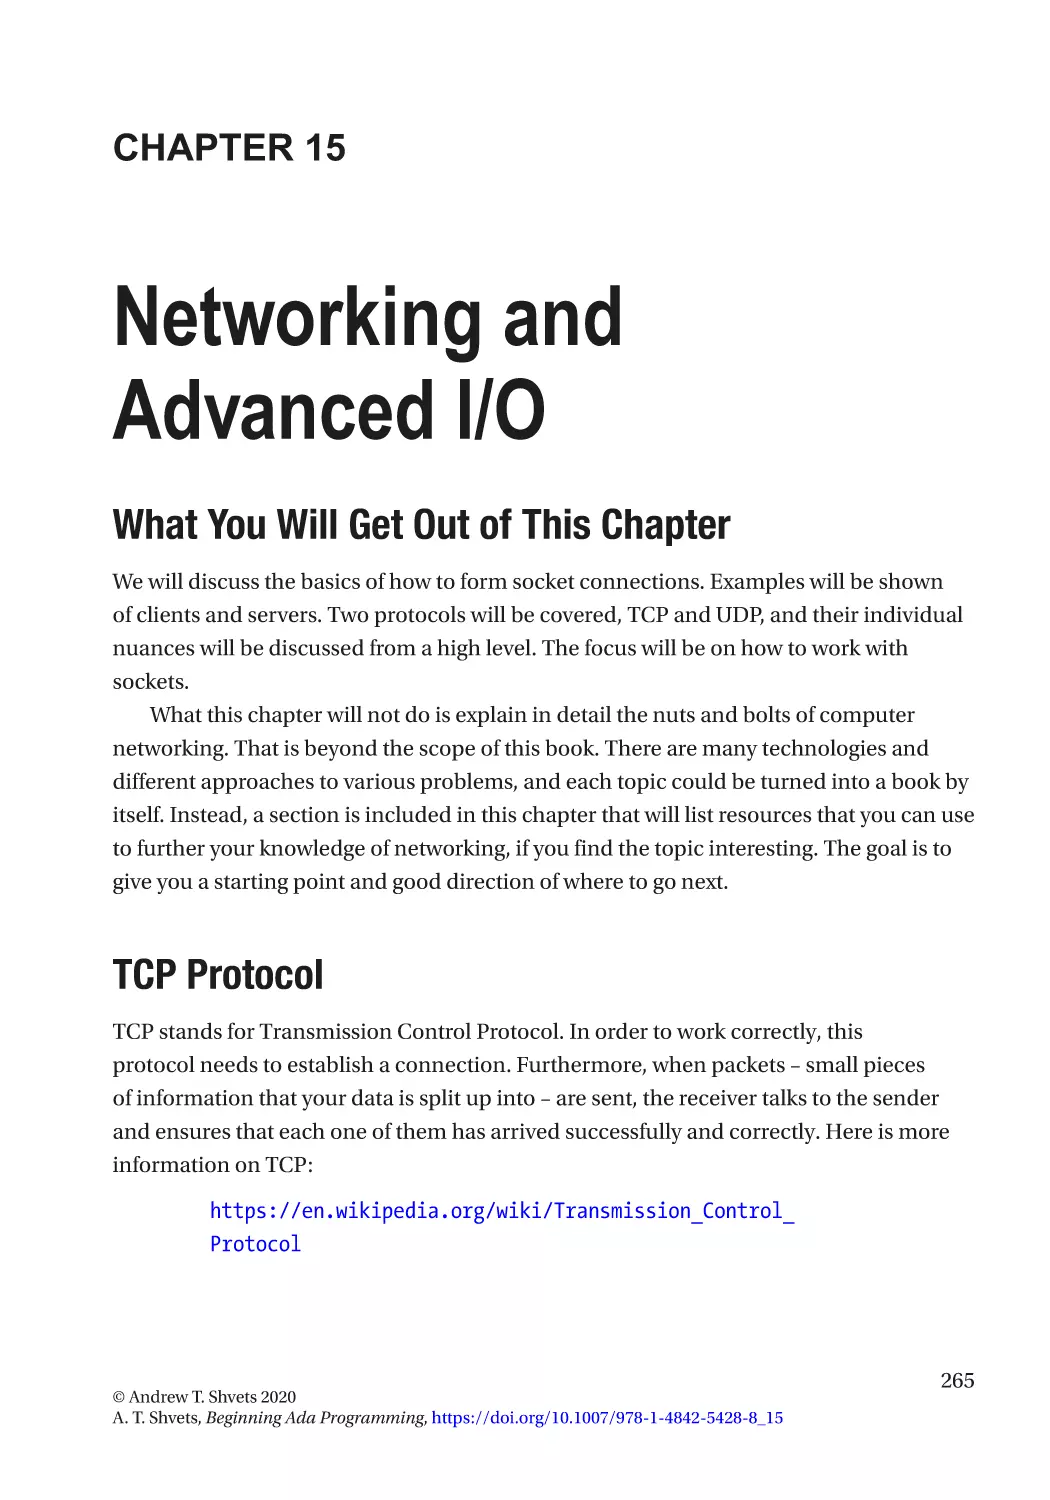 Chapter 15
What You Will Get Out of This Chapter
TCP Protocol